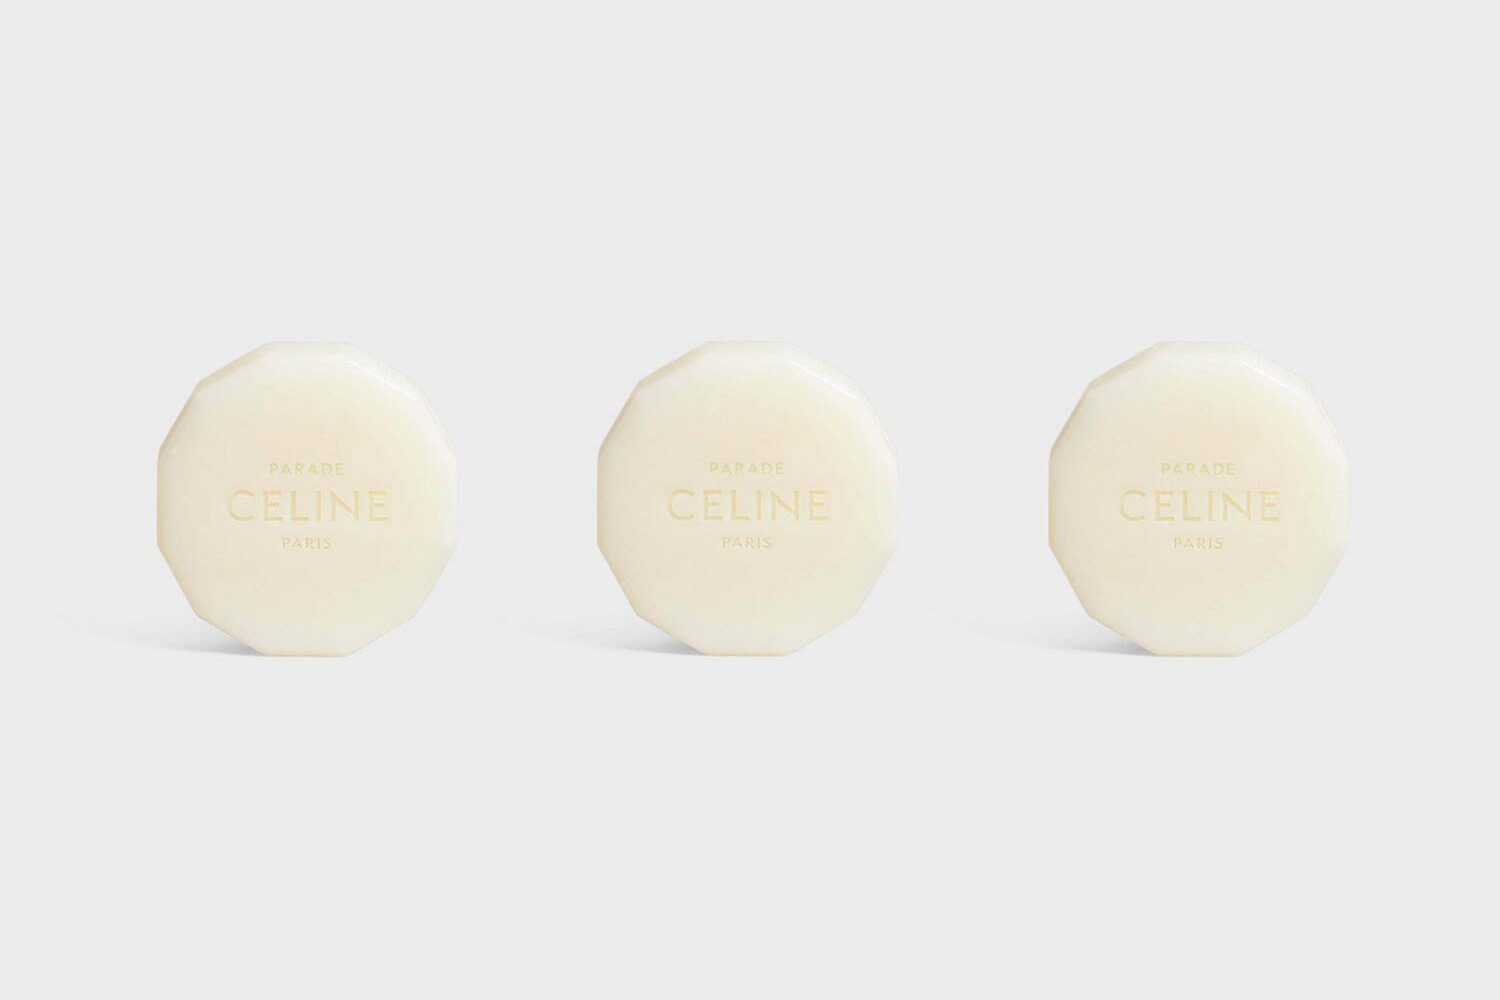 CELINE's $94 Scented Bar Soap Makes Lathering a Luxury